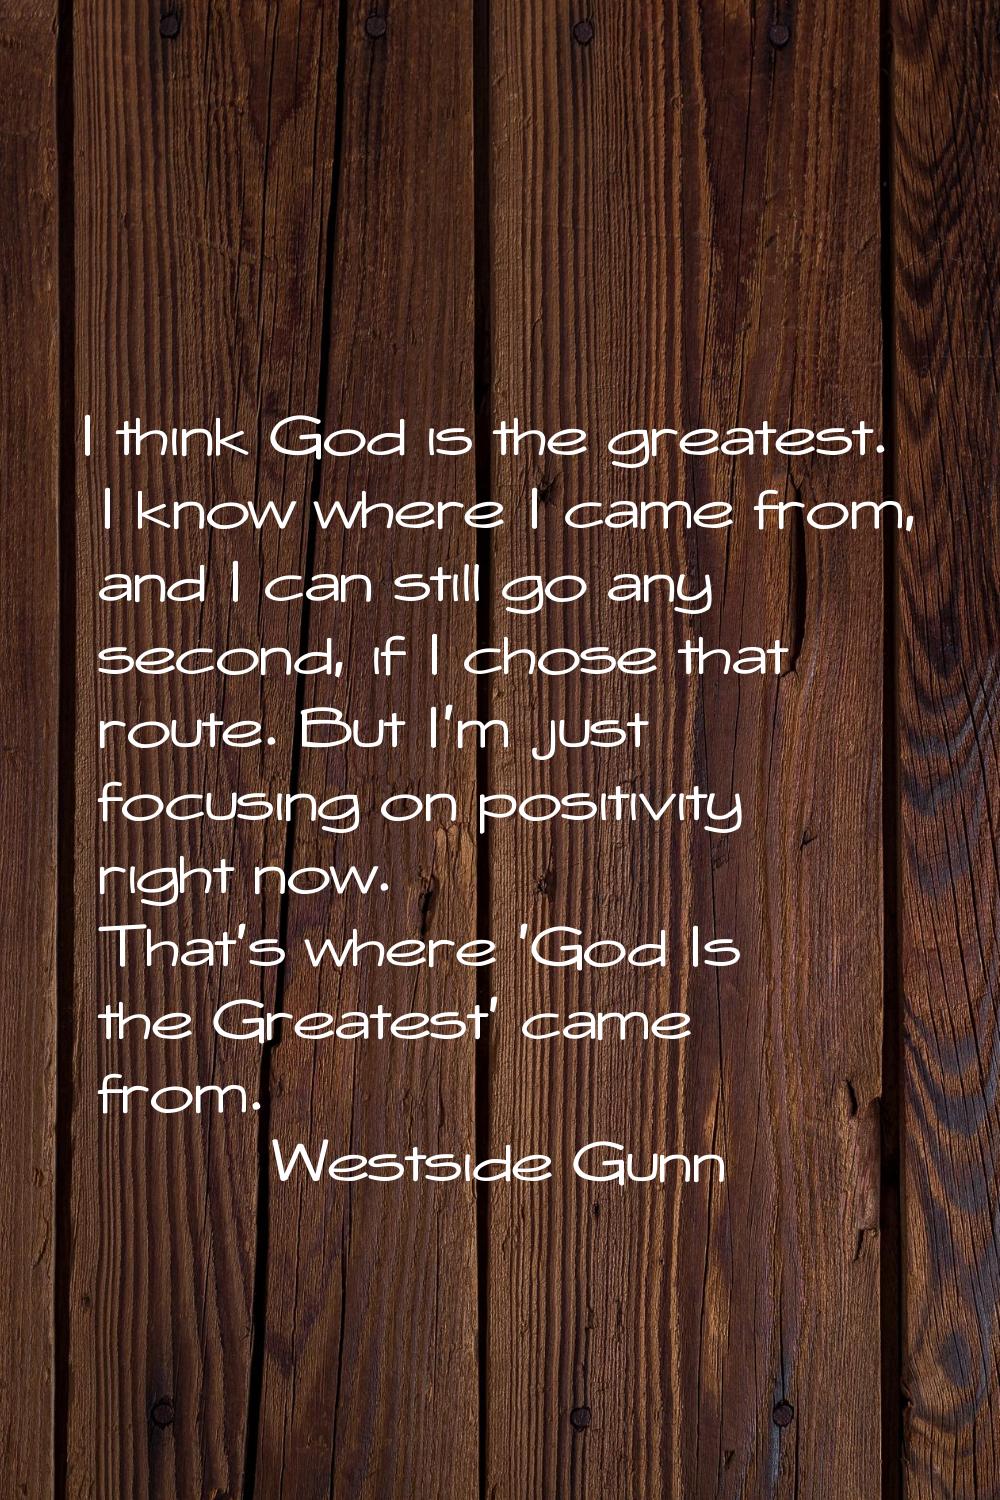 I think God is the greatest. I know where I came from, and I can still go any second, if I chose th